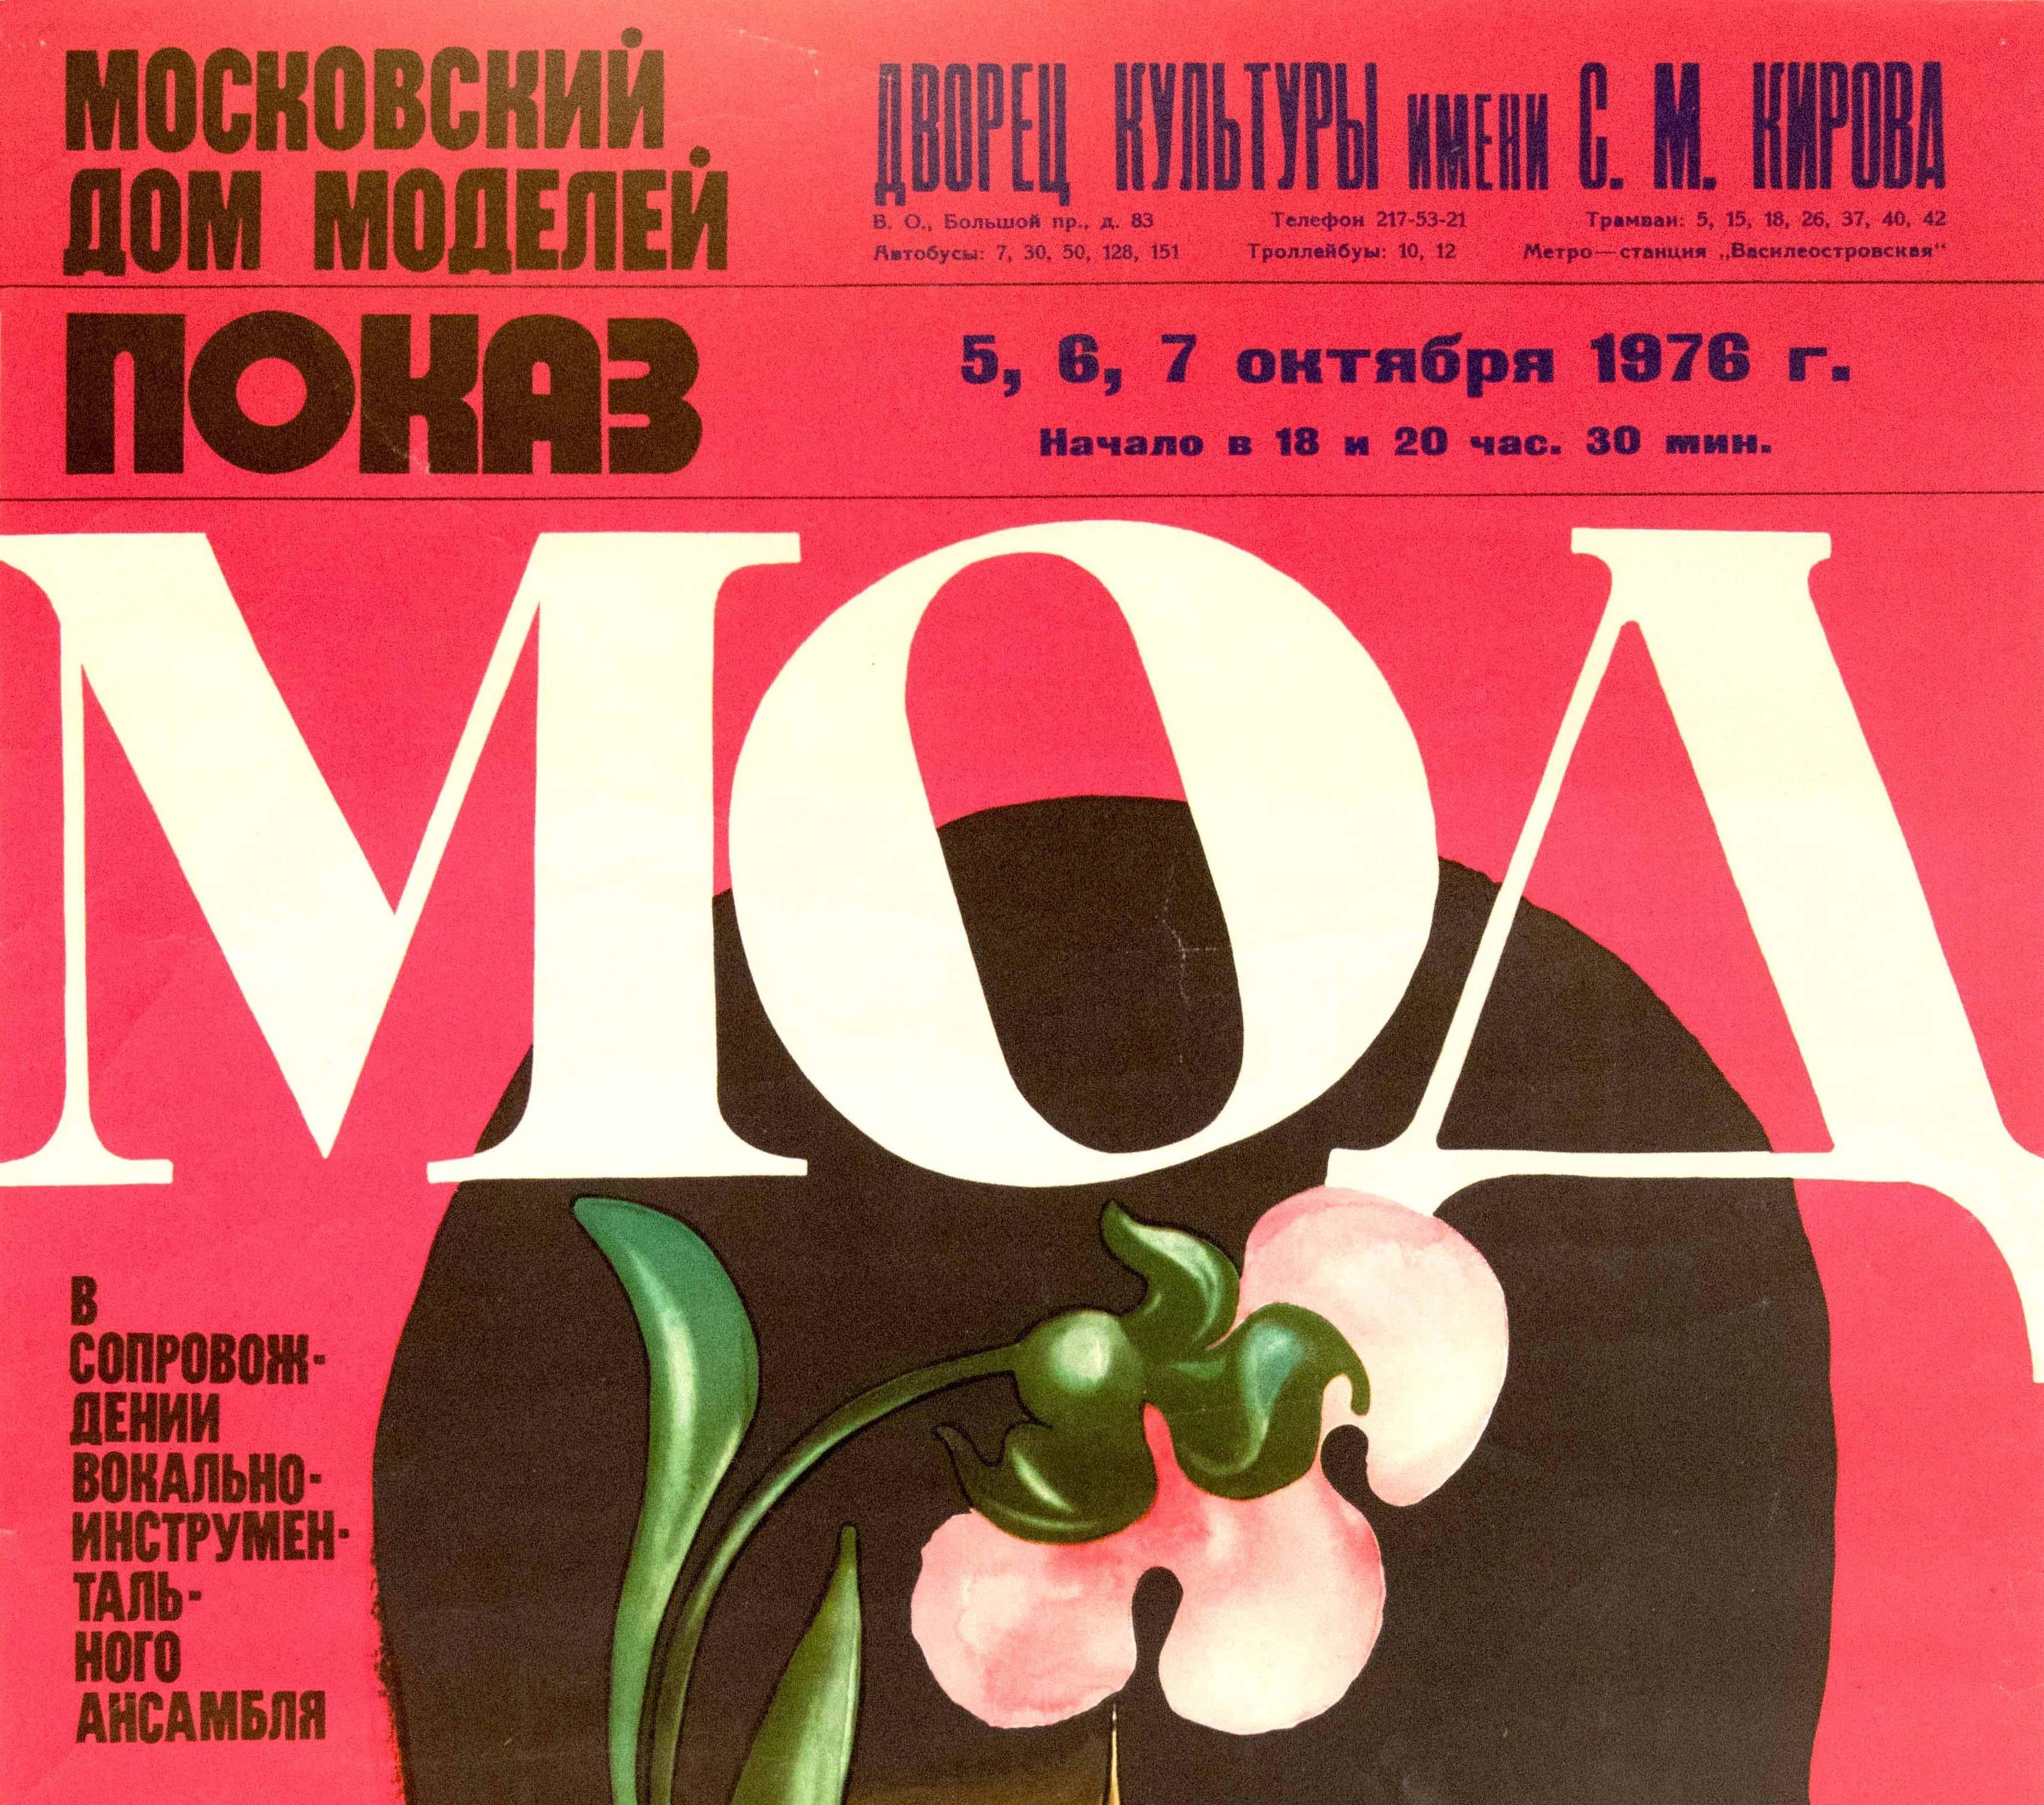 Original Vintage Poster Moscow Fashion House Show Palace Of Culture USSR Model - Print by E. Drobitskiy